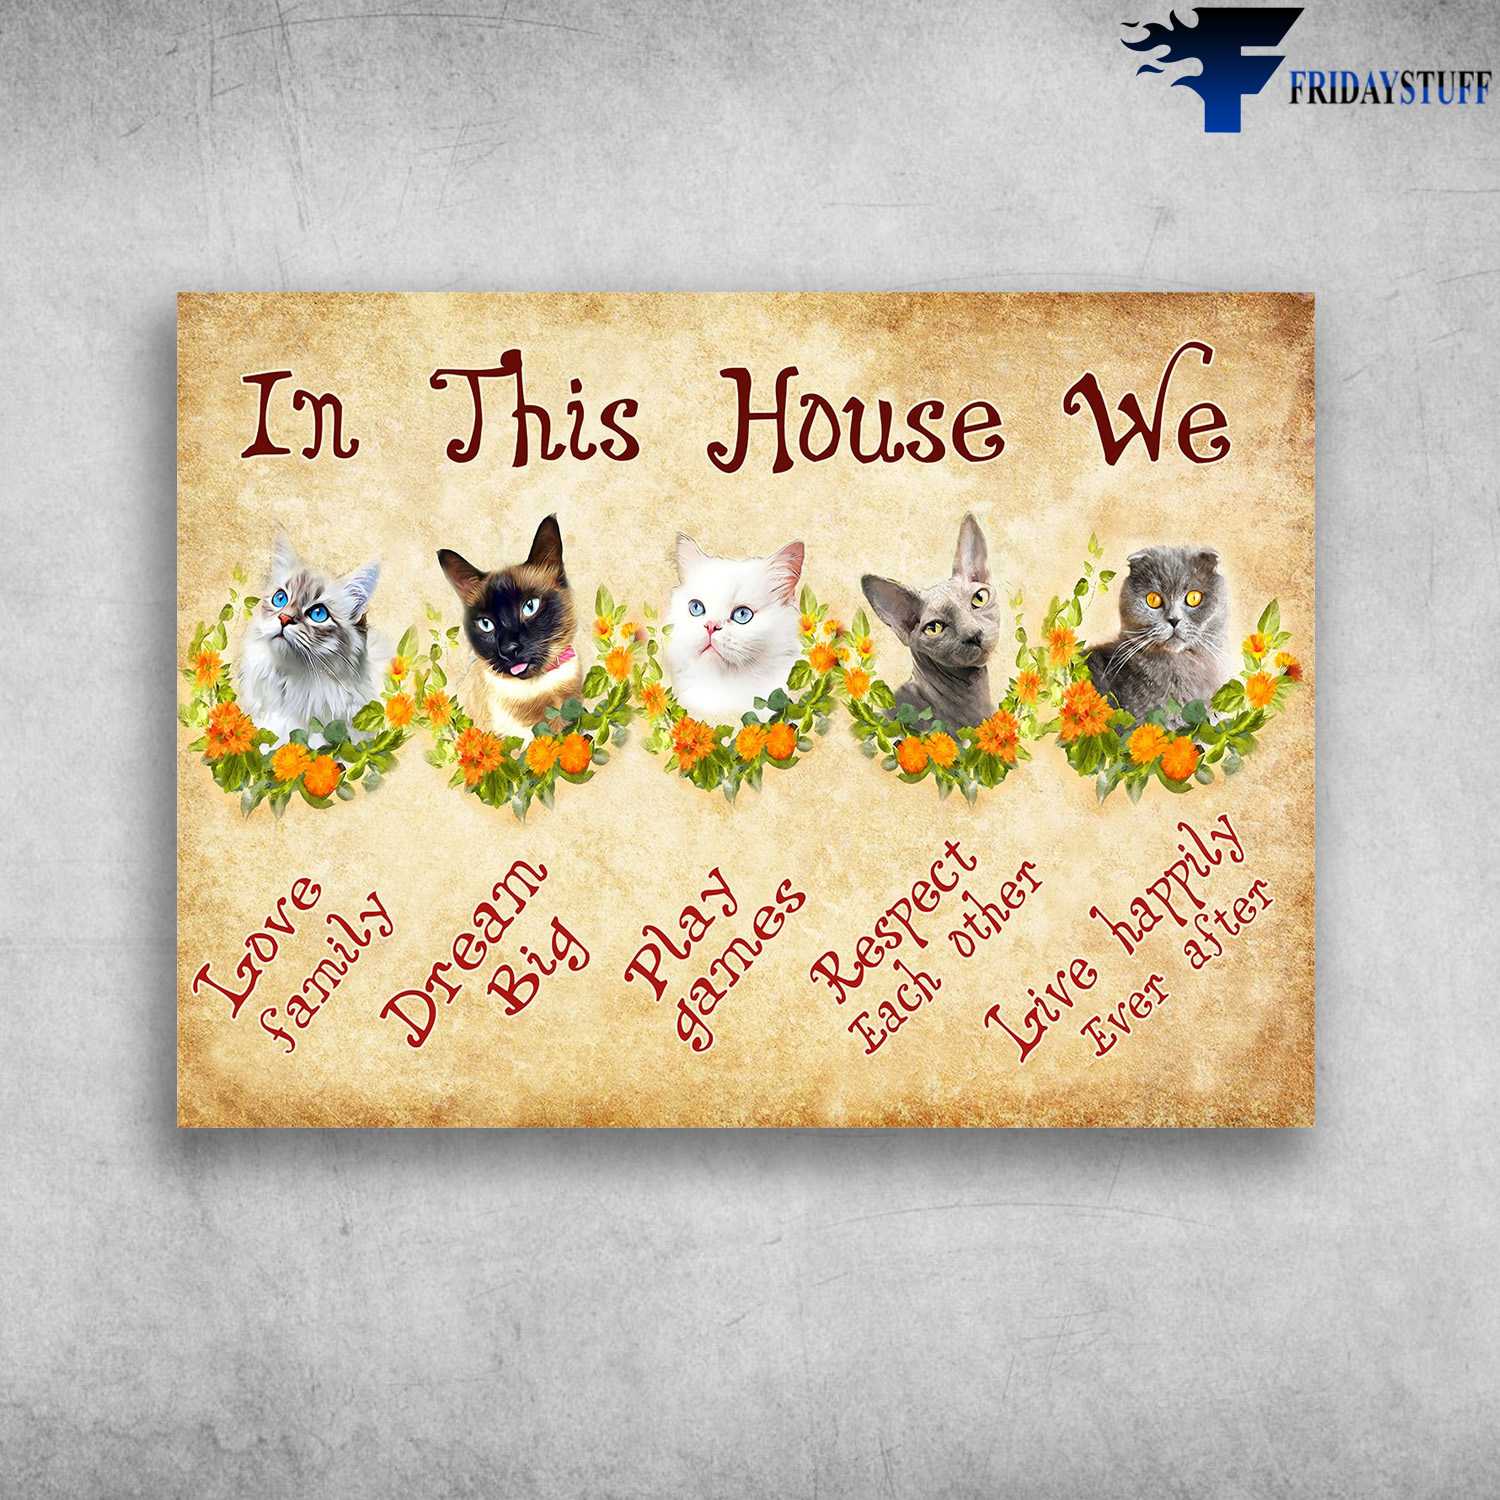 Cat Flower Lover - In This House, We Love Family, Dream Big, Play Games, Respect Each Other, Live Happily Ever After